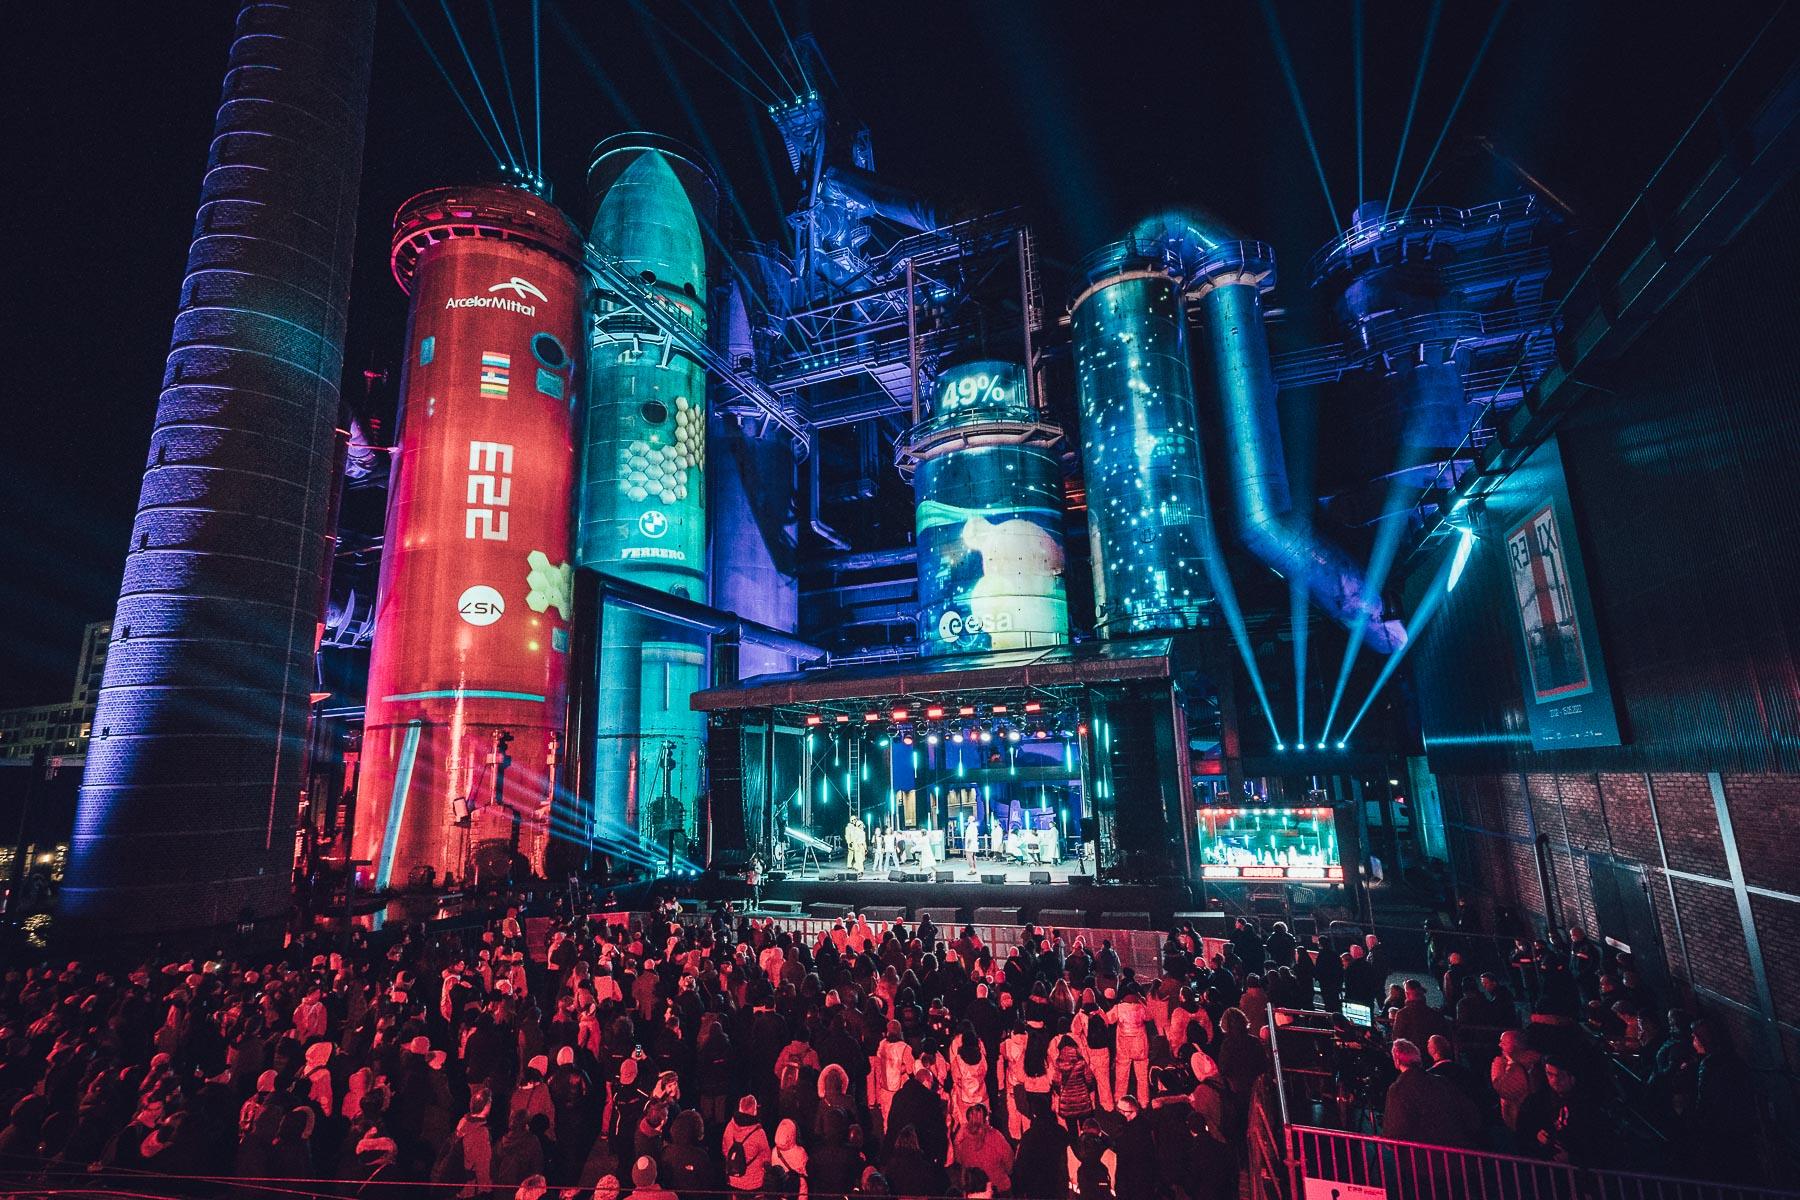 A wide shot of a crowd facing an outdoor stage. Blue lights are beaming out into the night sky, and industrial brick tube-towers and machinery frames the stage and has video content projected onto them.